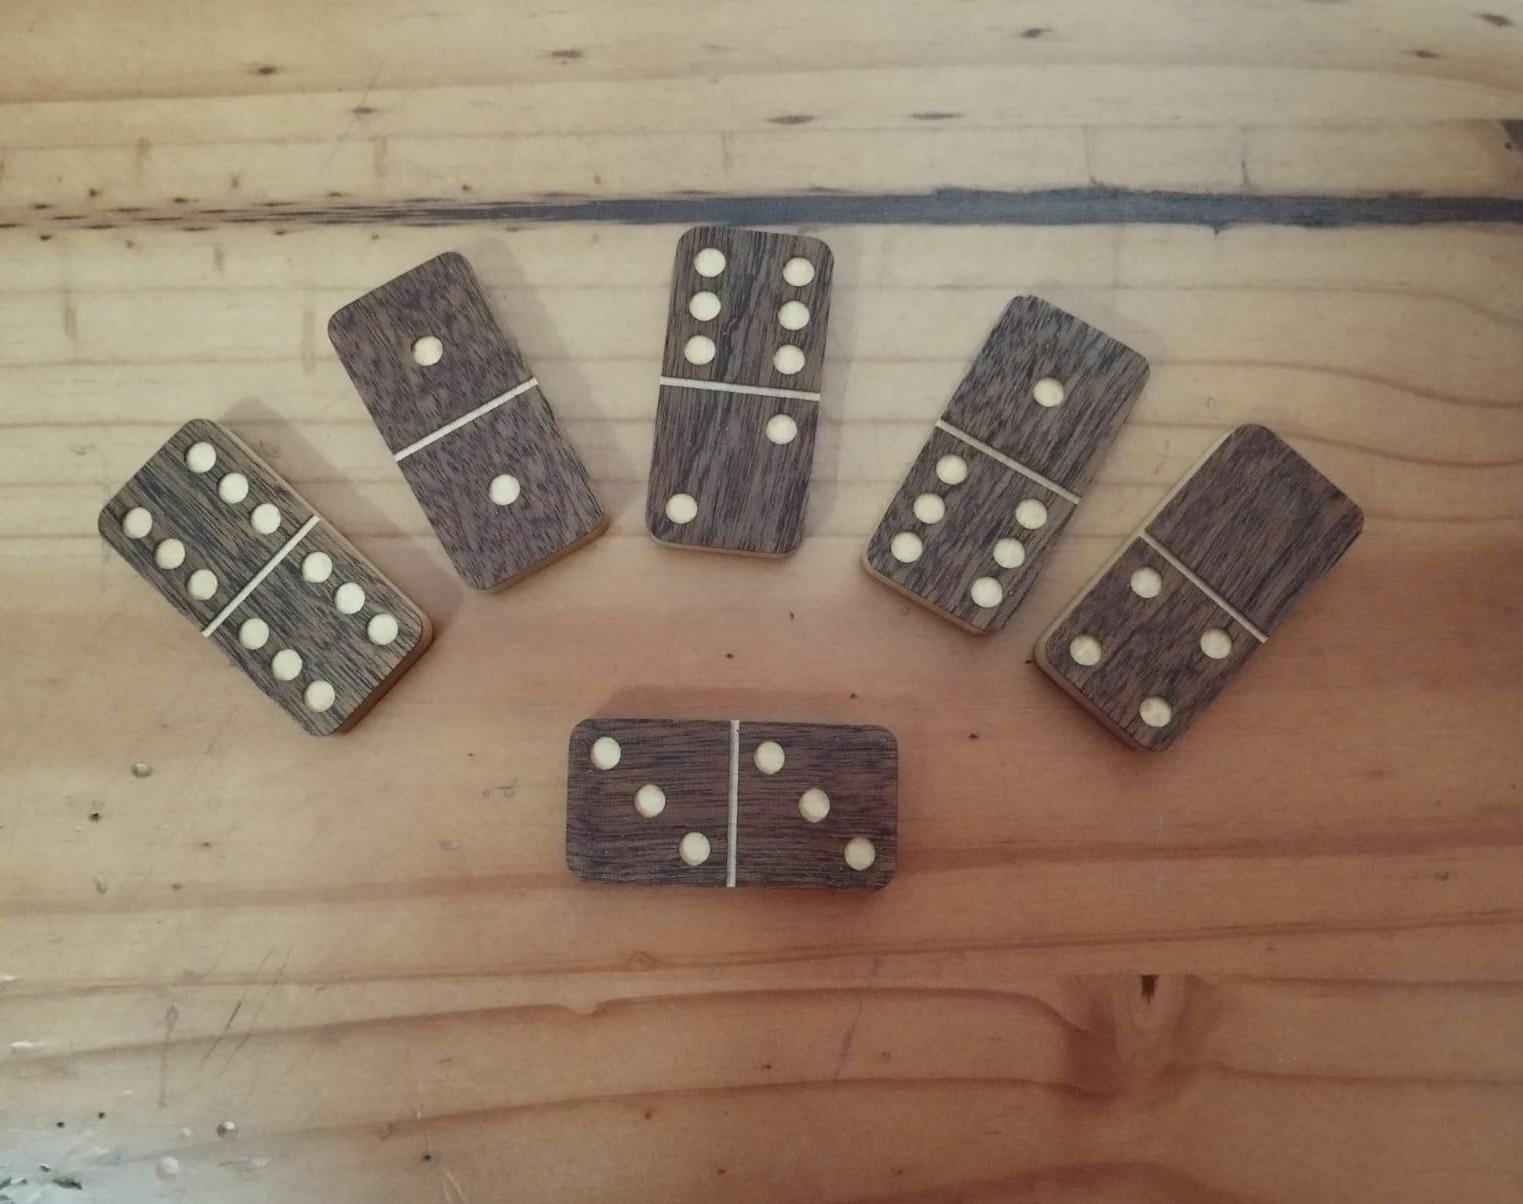 Wooden Domino Set Using a CNC